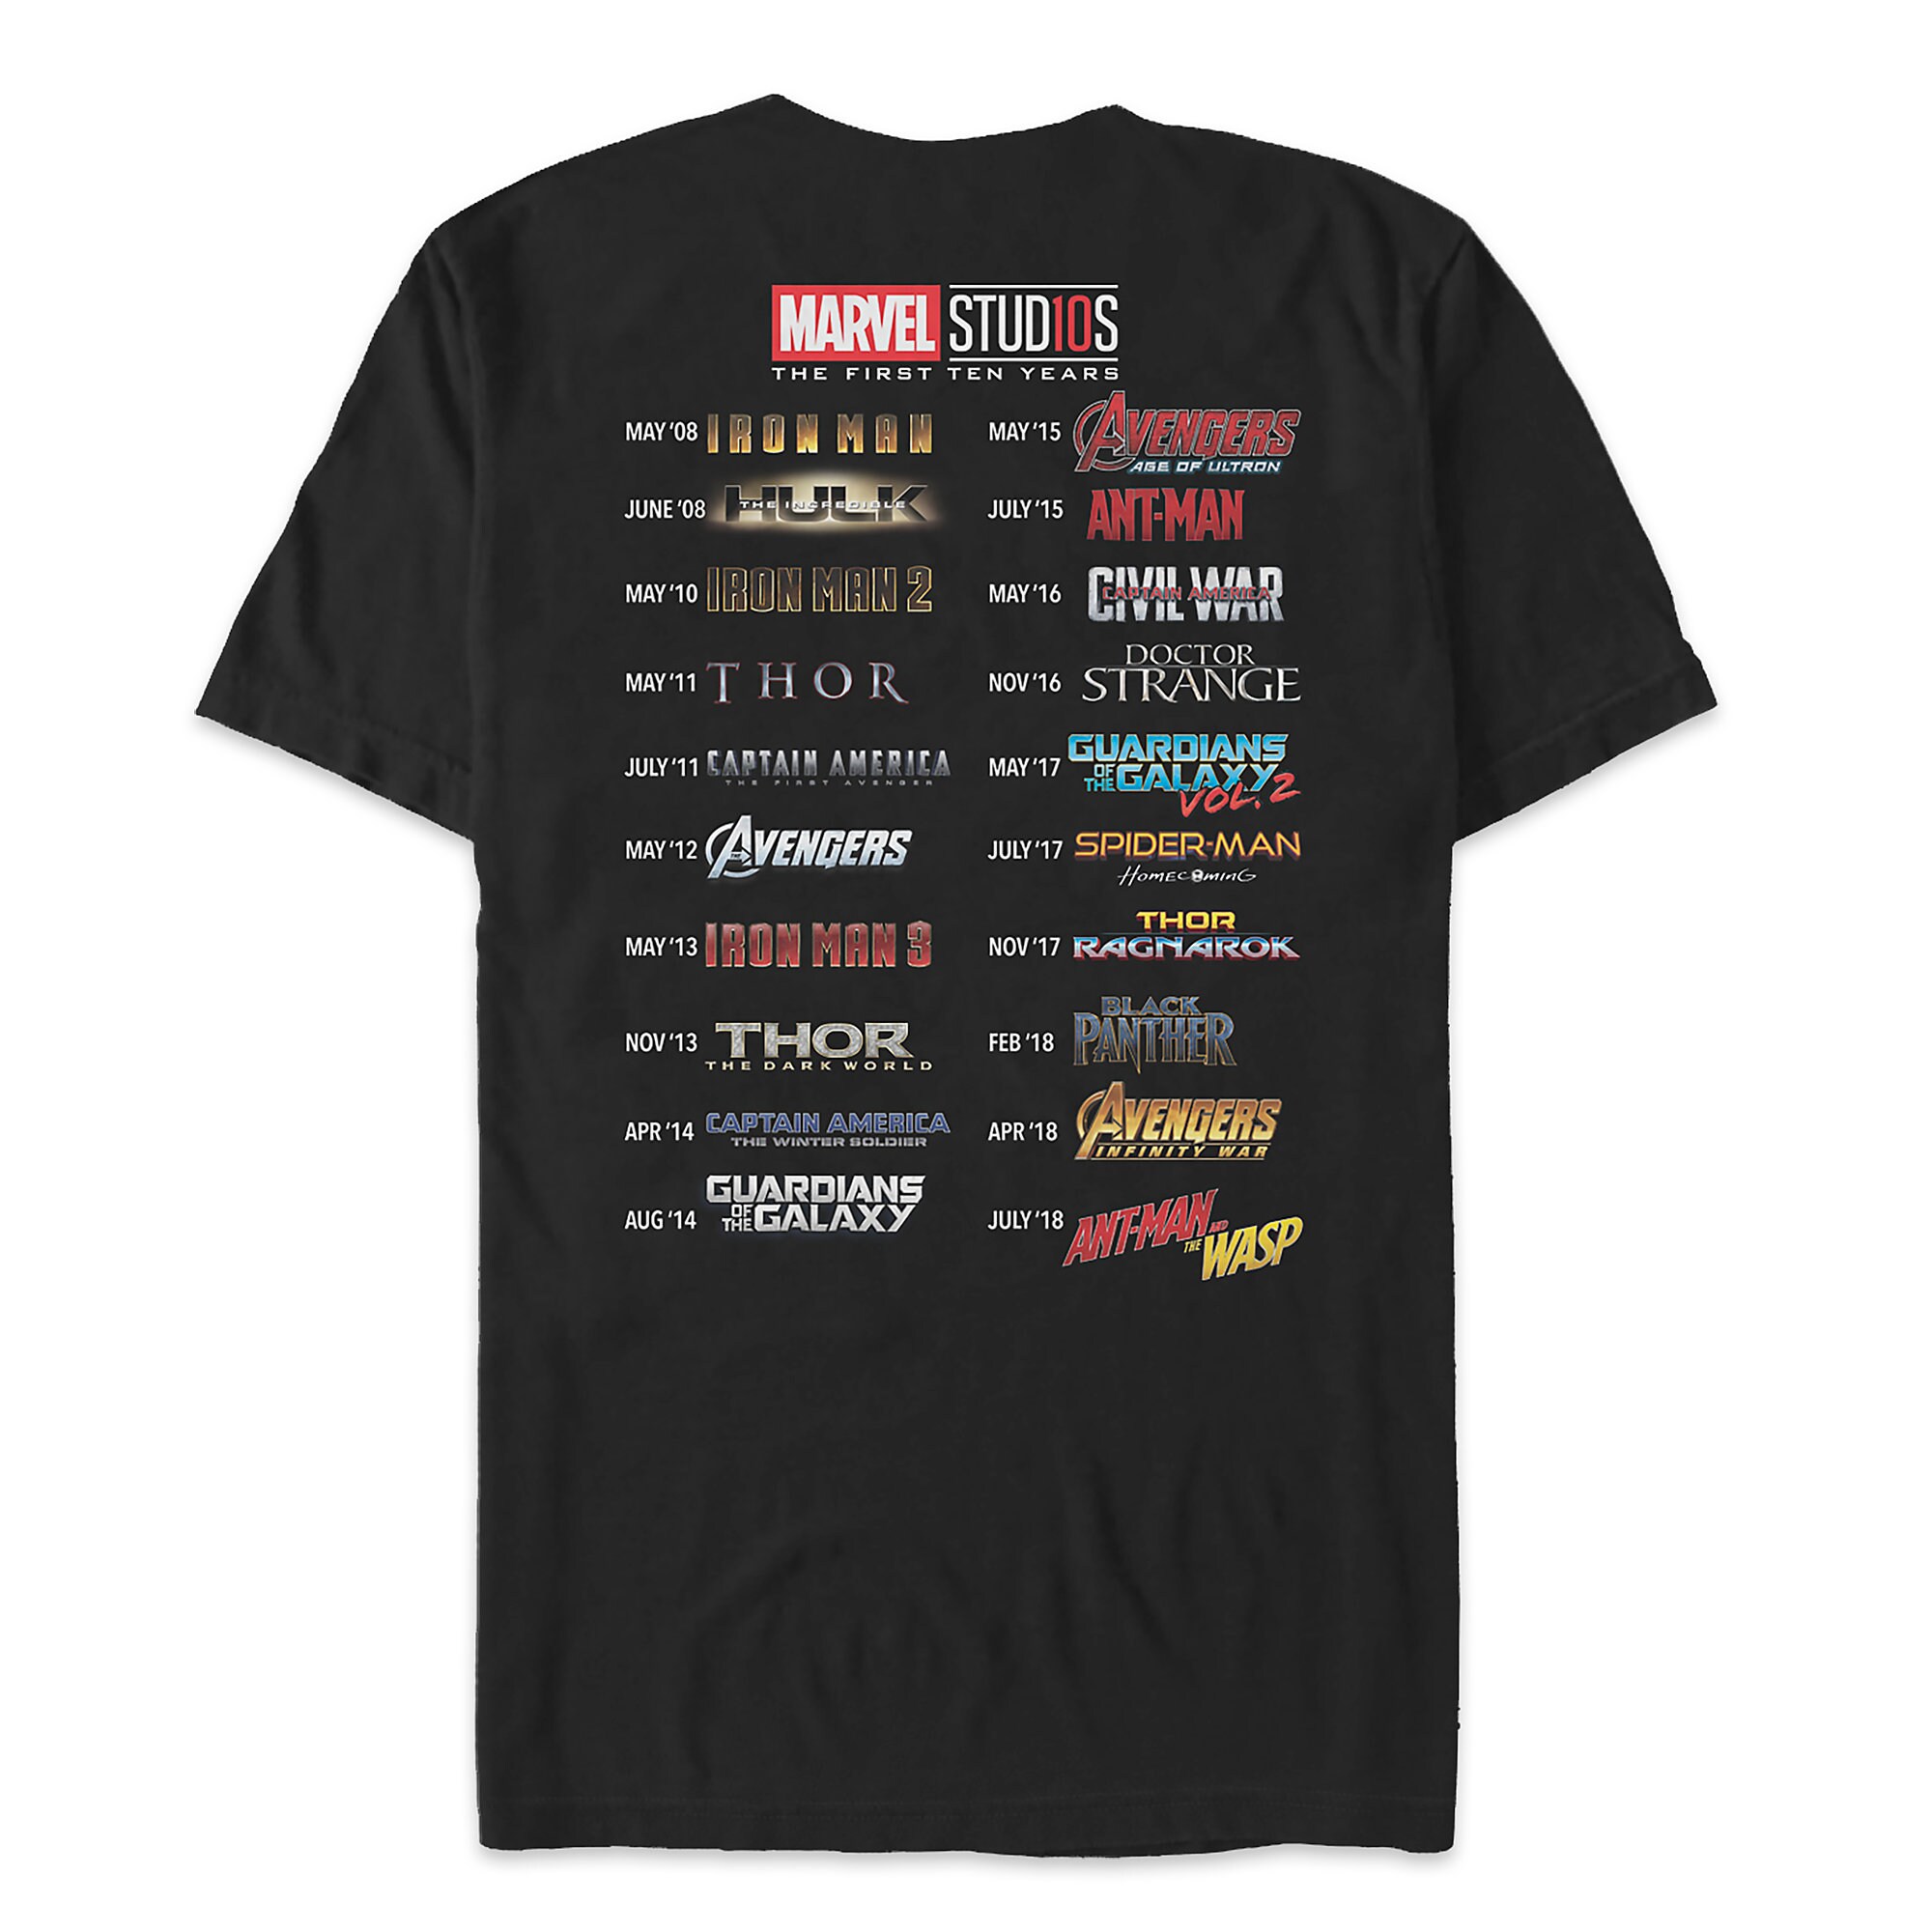 Marvel Studios 10th Anniversary T-Shirt for Adults